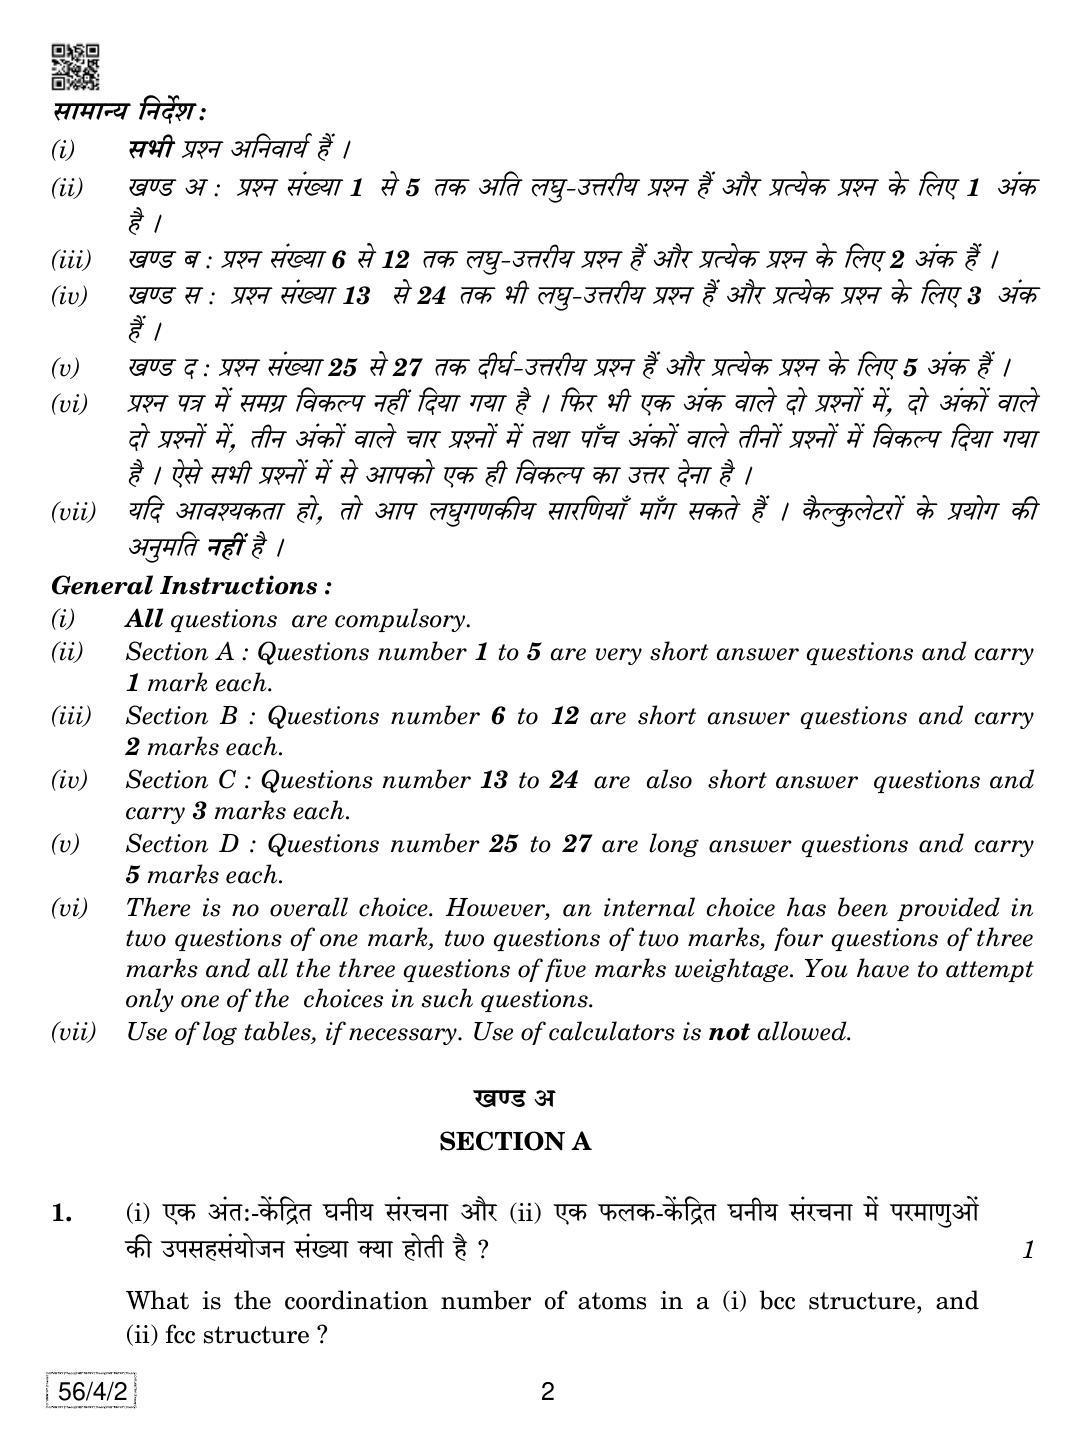 CBSE Class 12 56-4-2 Chemistry 2019 Question Paper - Page 2